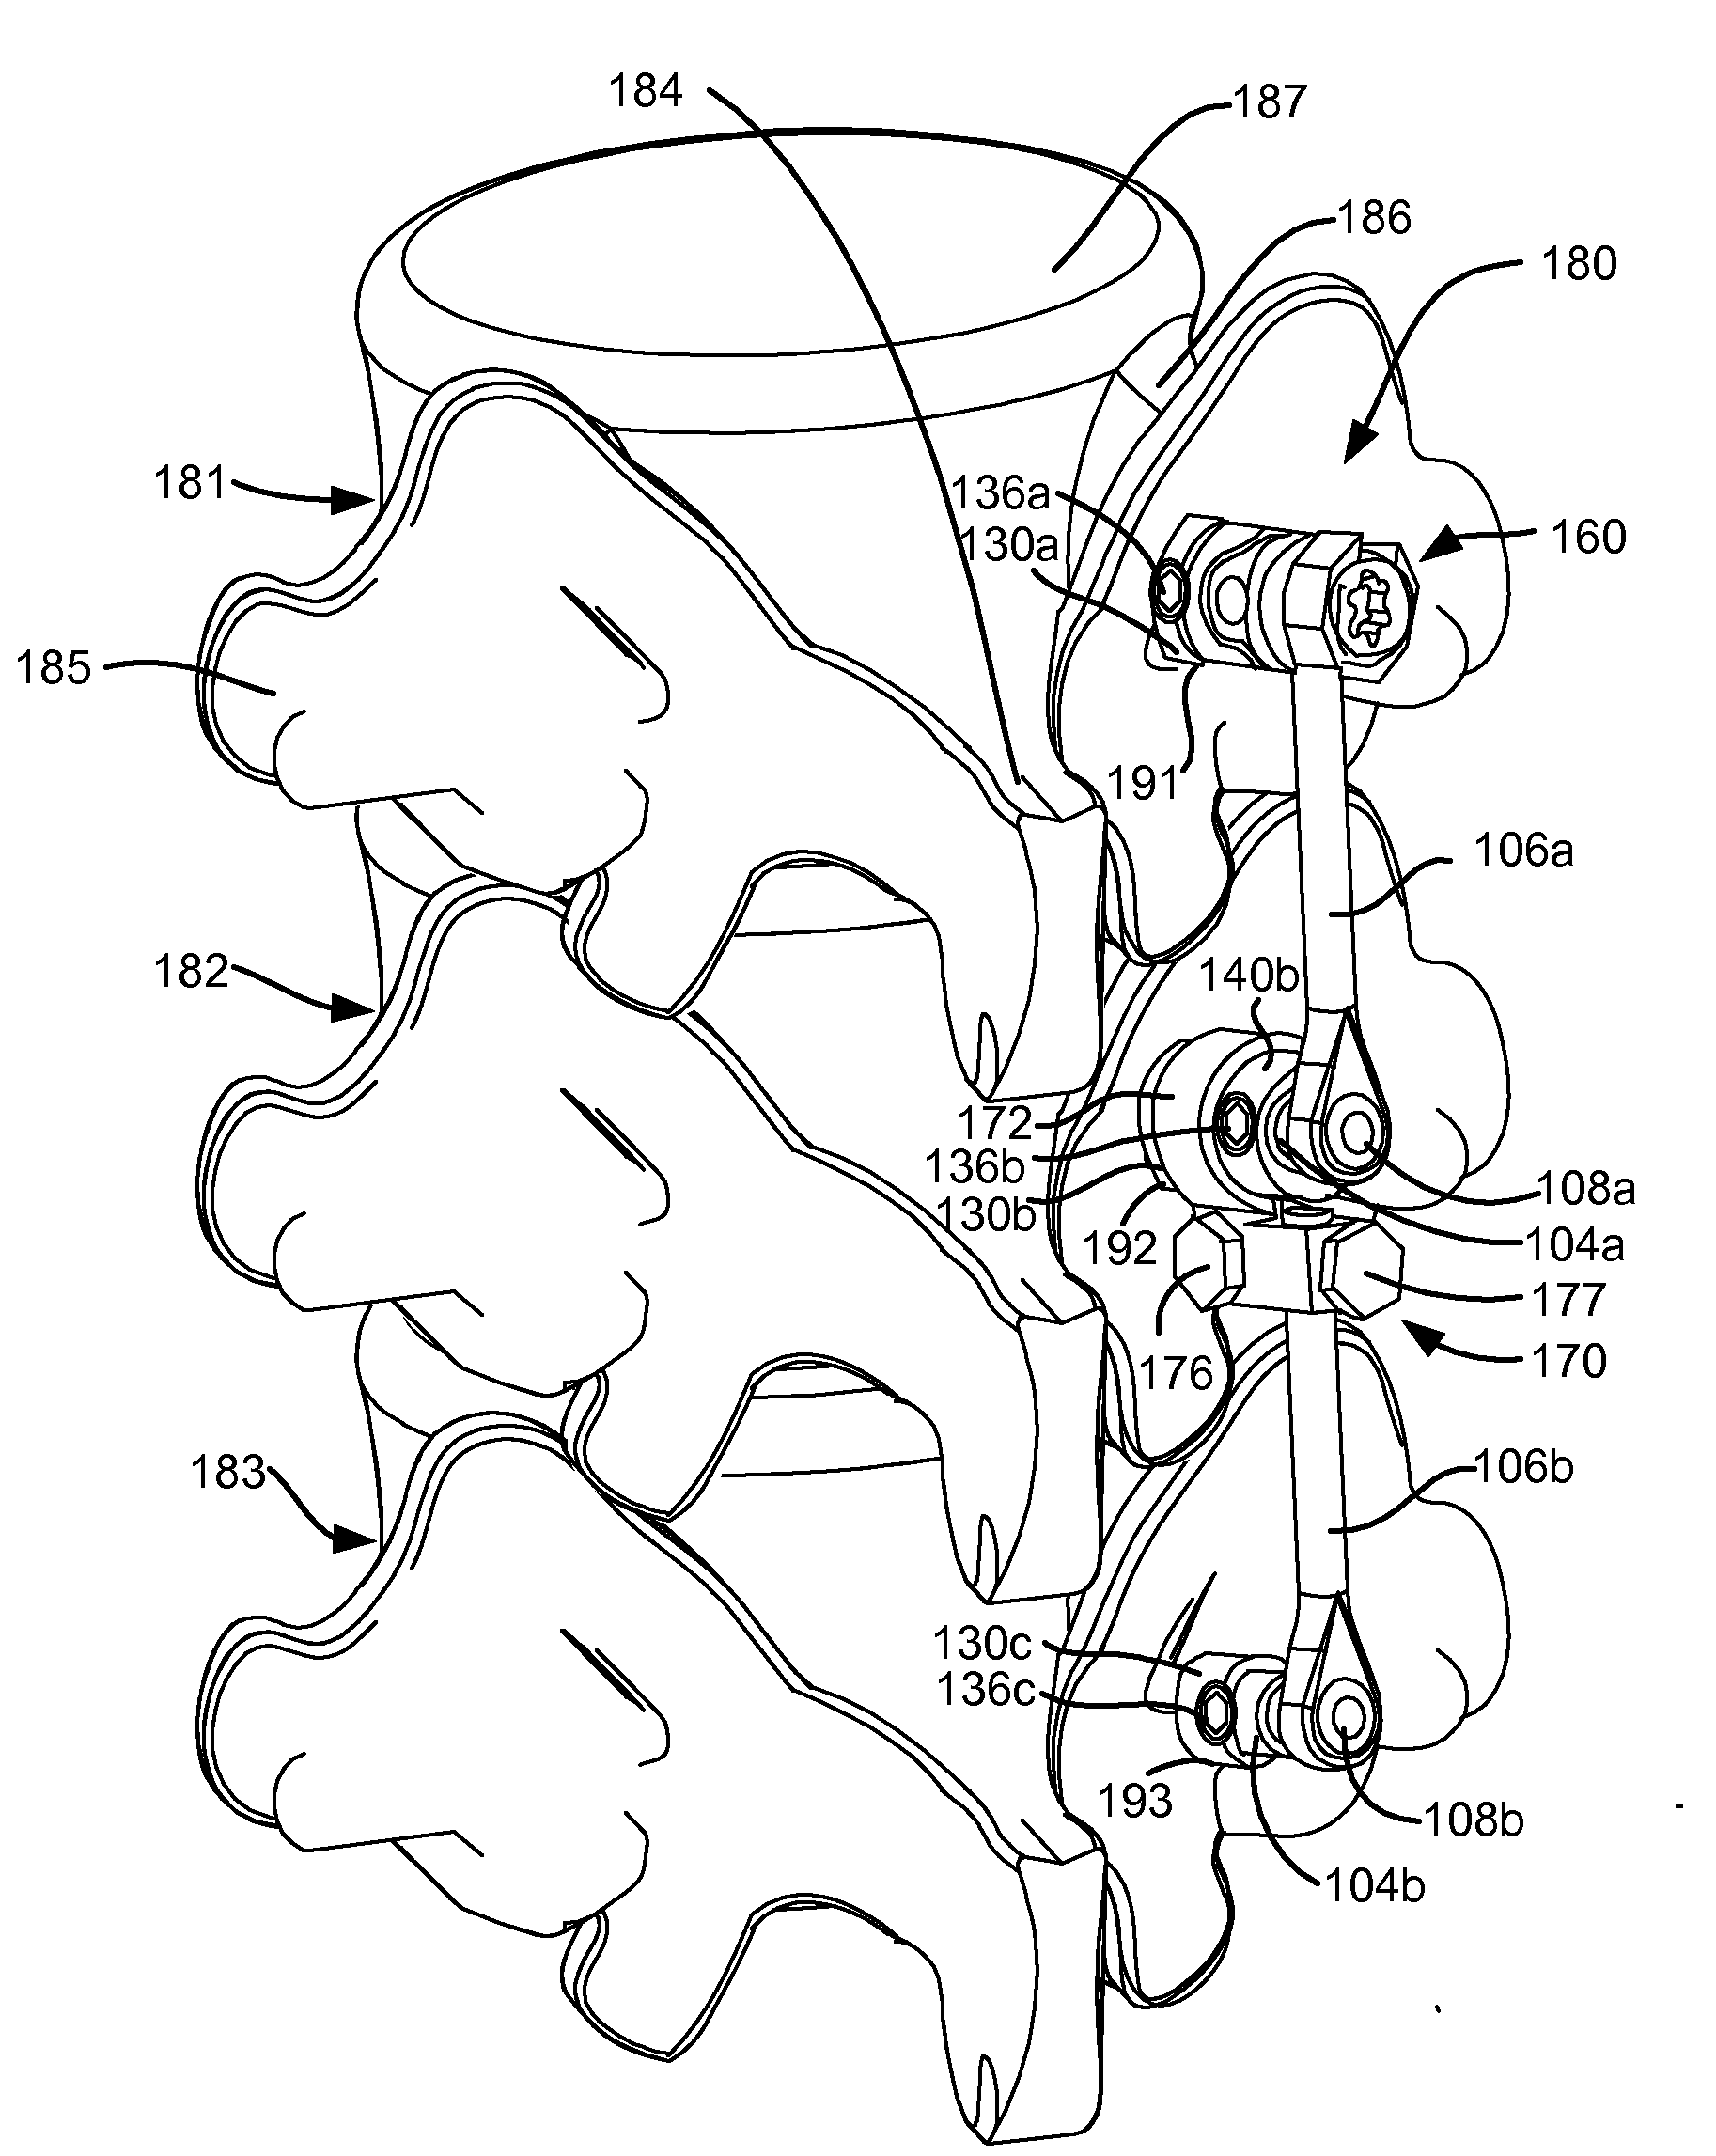 Versatile offset polyaxial connector and method for dynamic stabilization of the spine